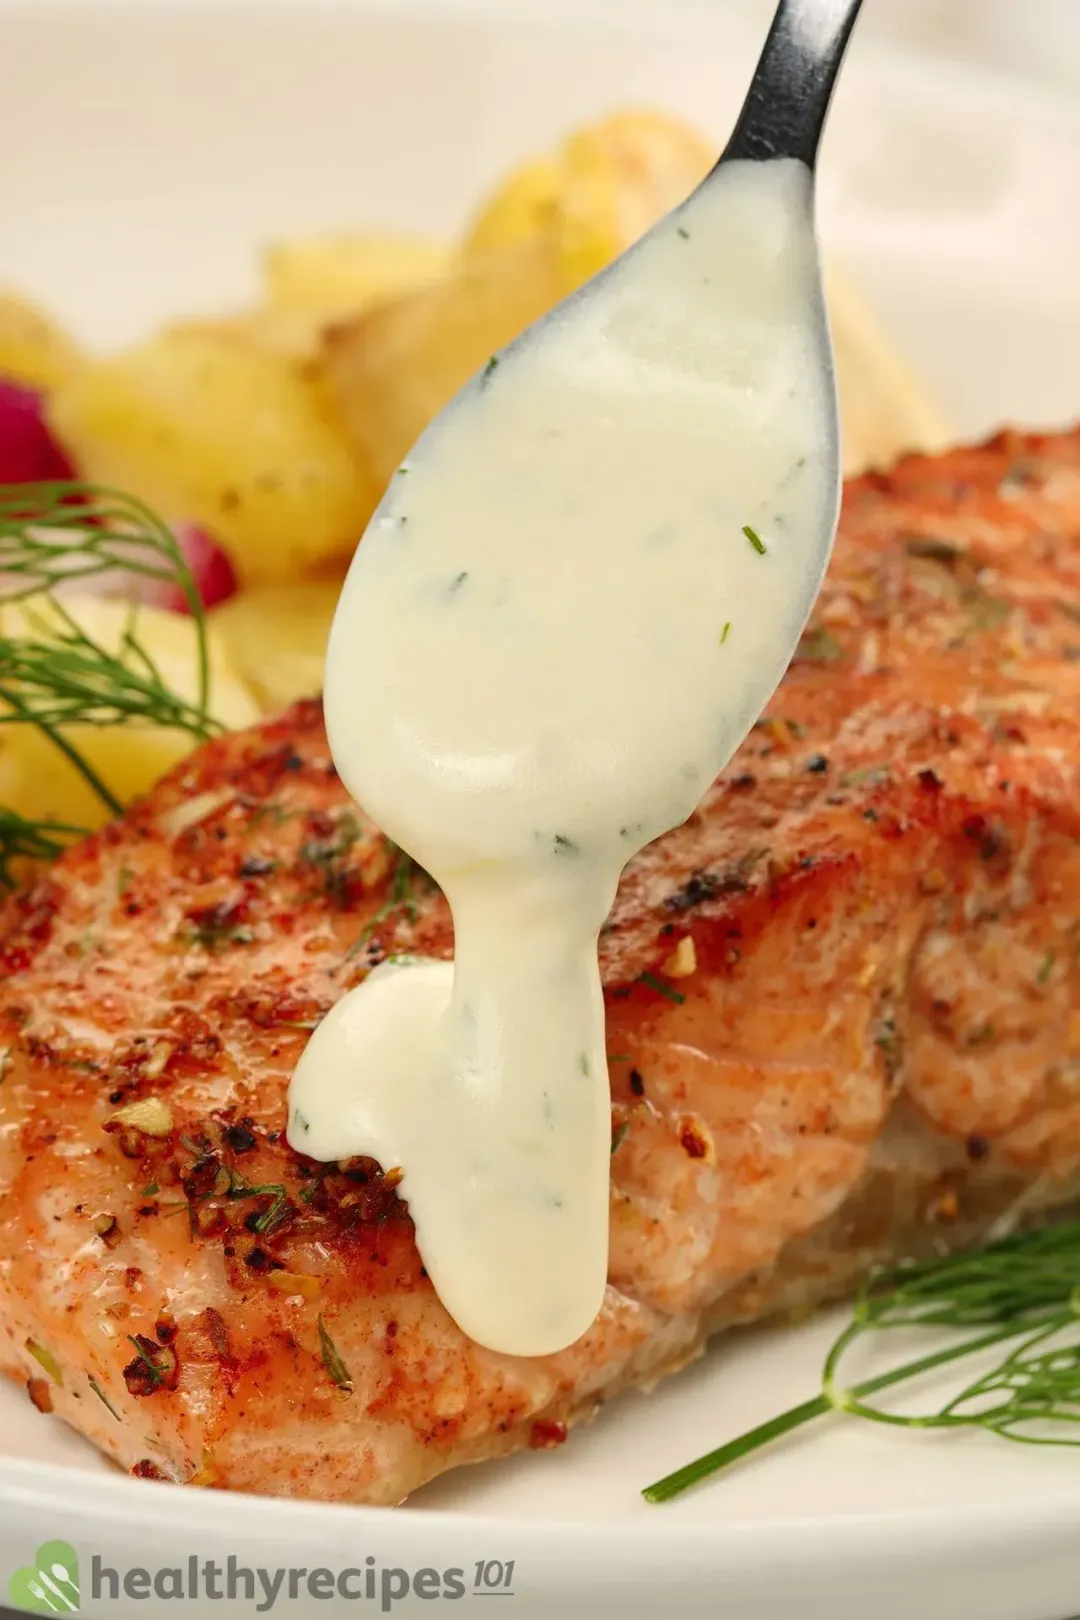 A close-up shot of a spoon slowly dropping a thick and creamy sauce onto a cooked salmon fillet with potatoes and dill in the background